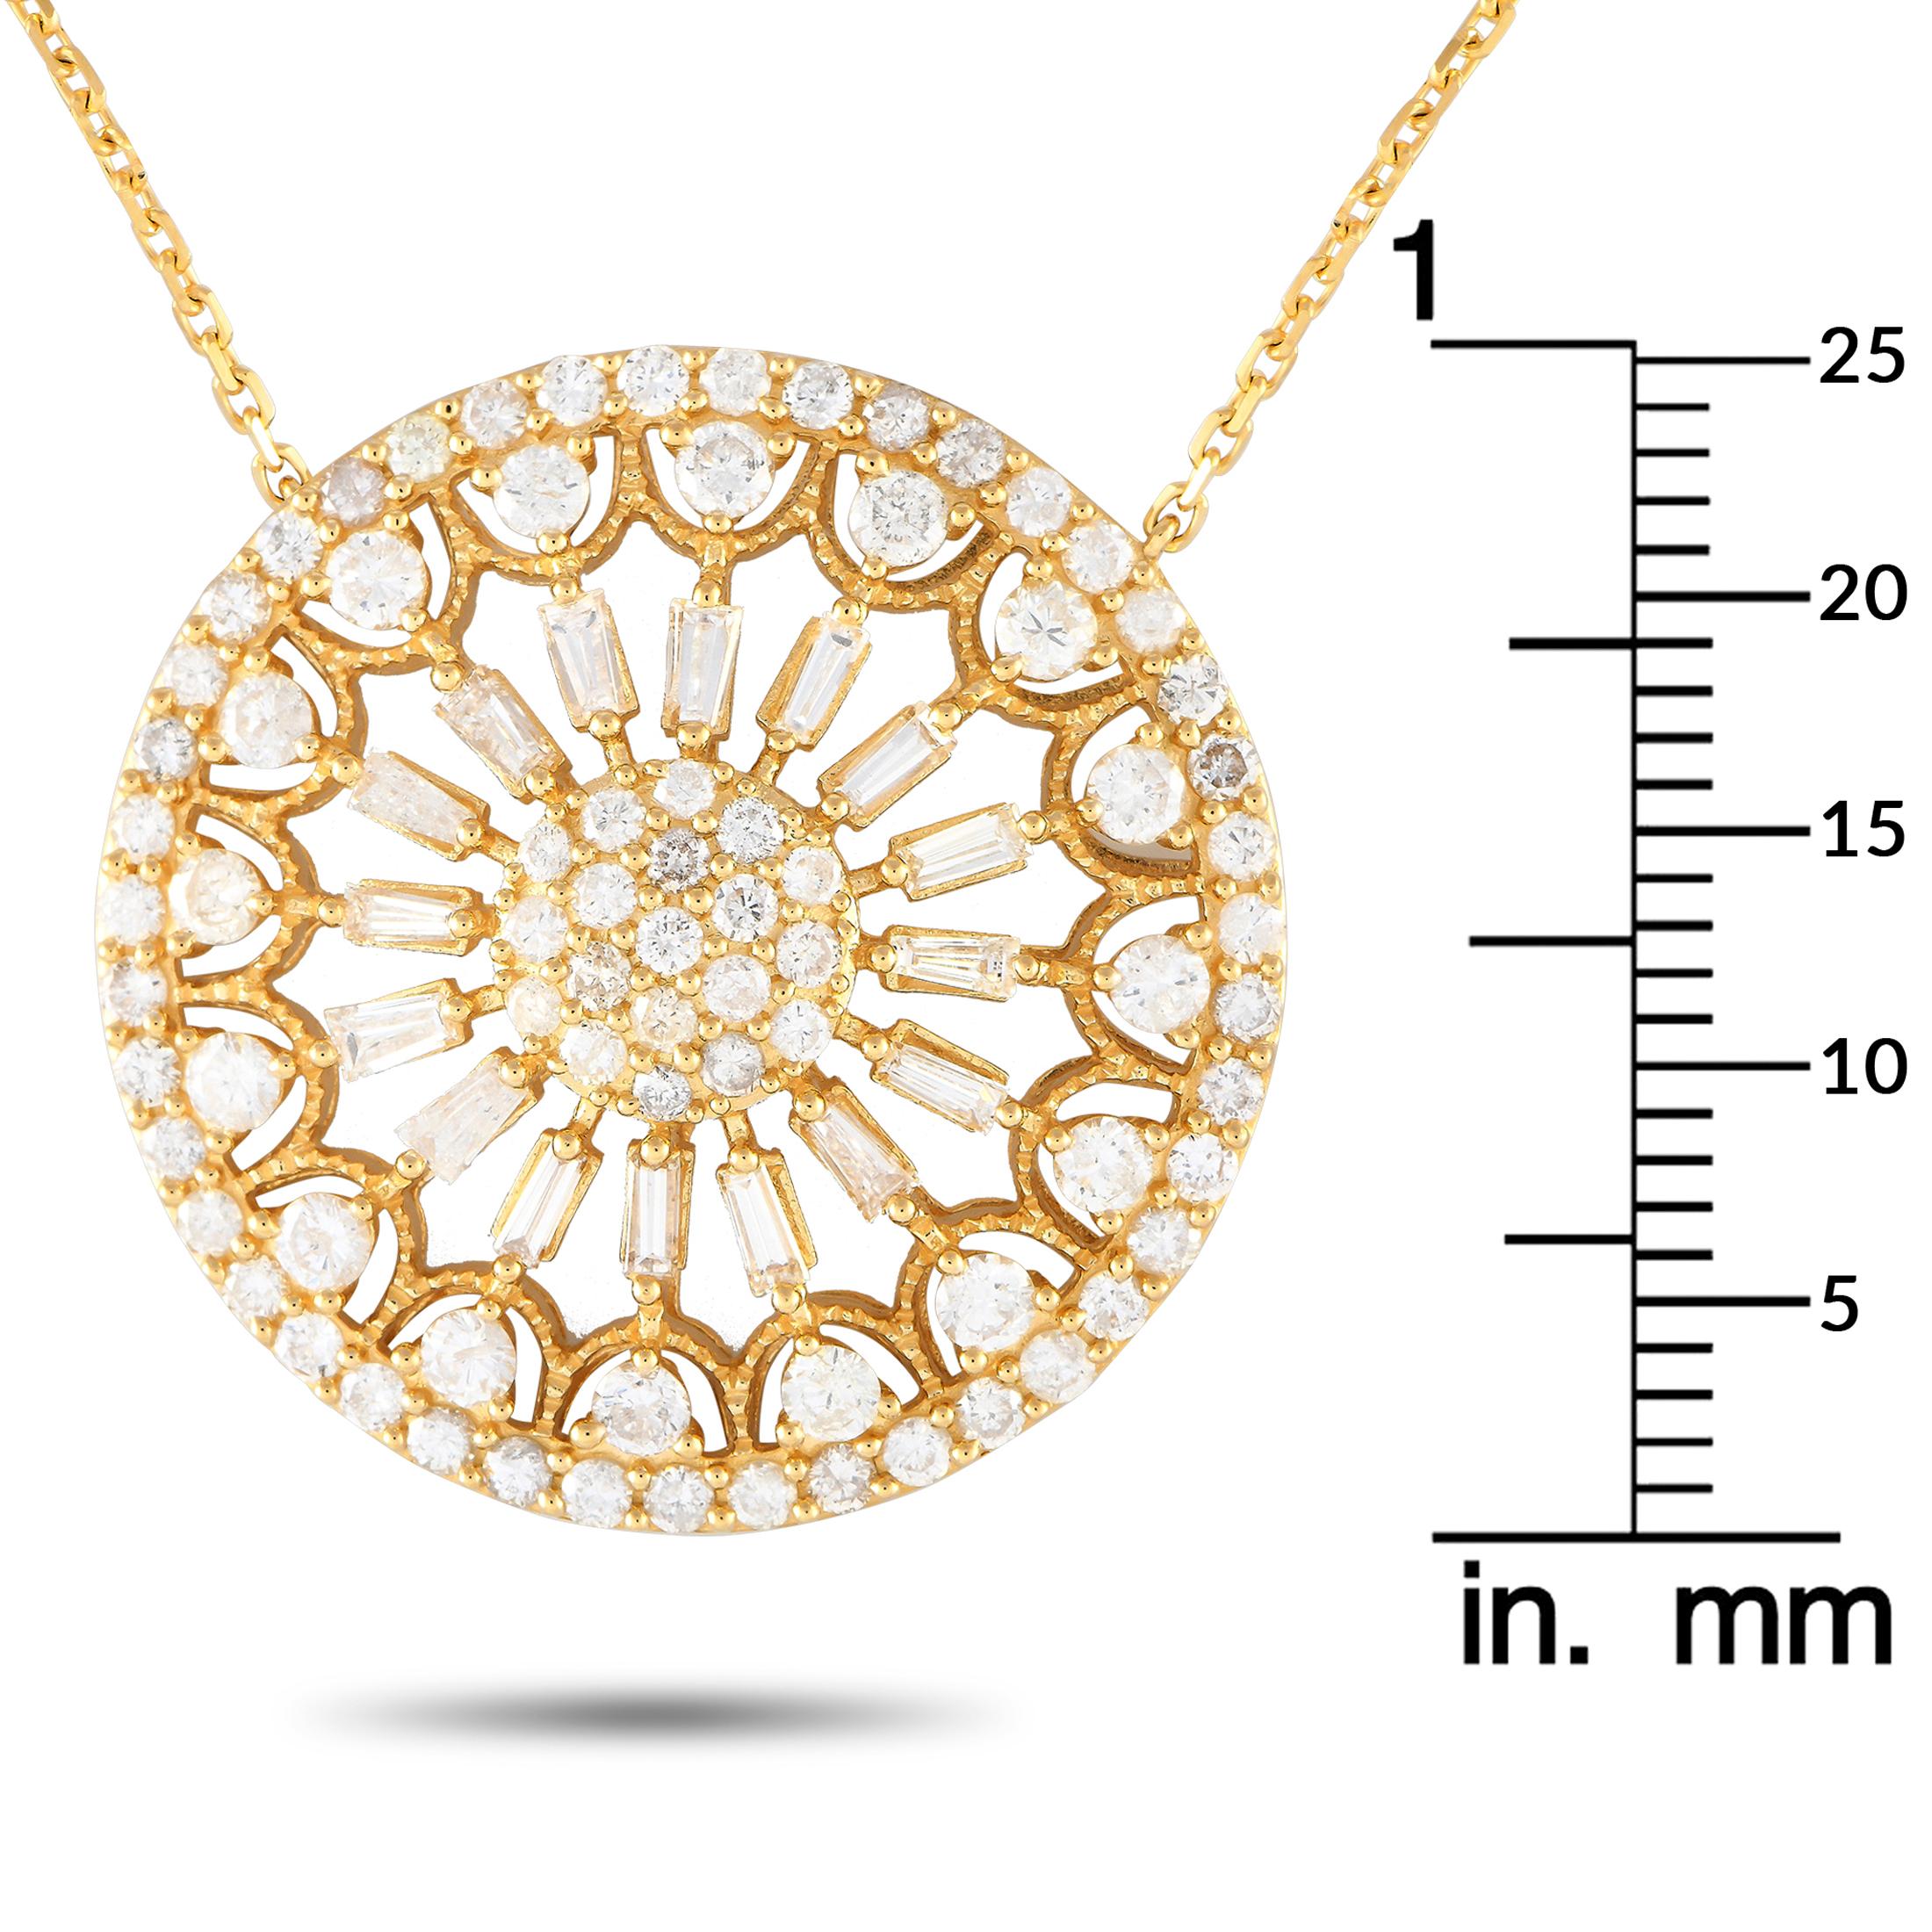 14K Yellow Gold 2.25ct Diamond Filigree Medallion Necklace PN15245-Y In New Condition For Sale In Southampton, PA